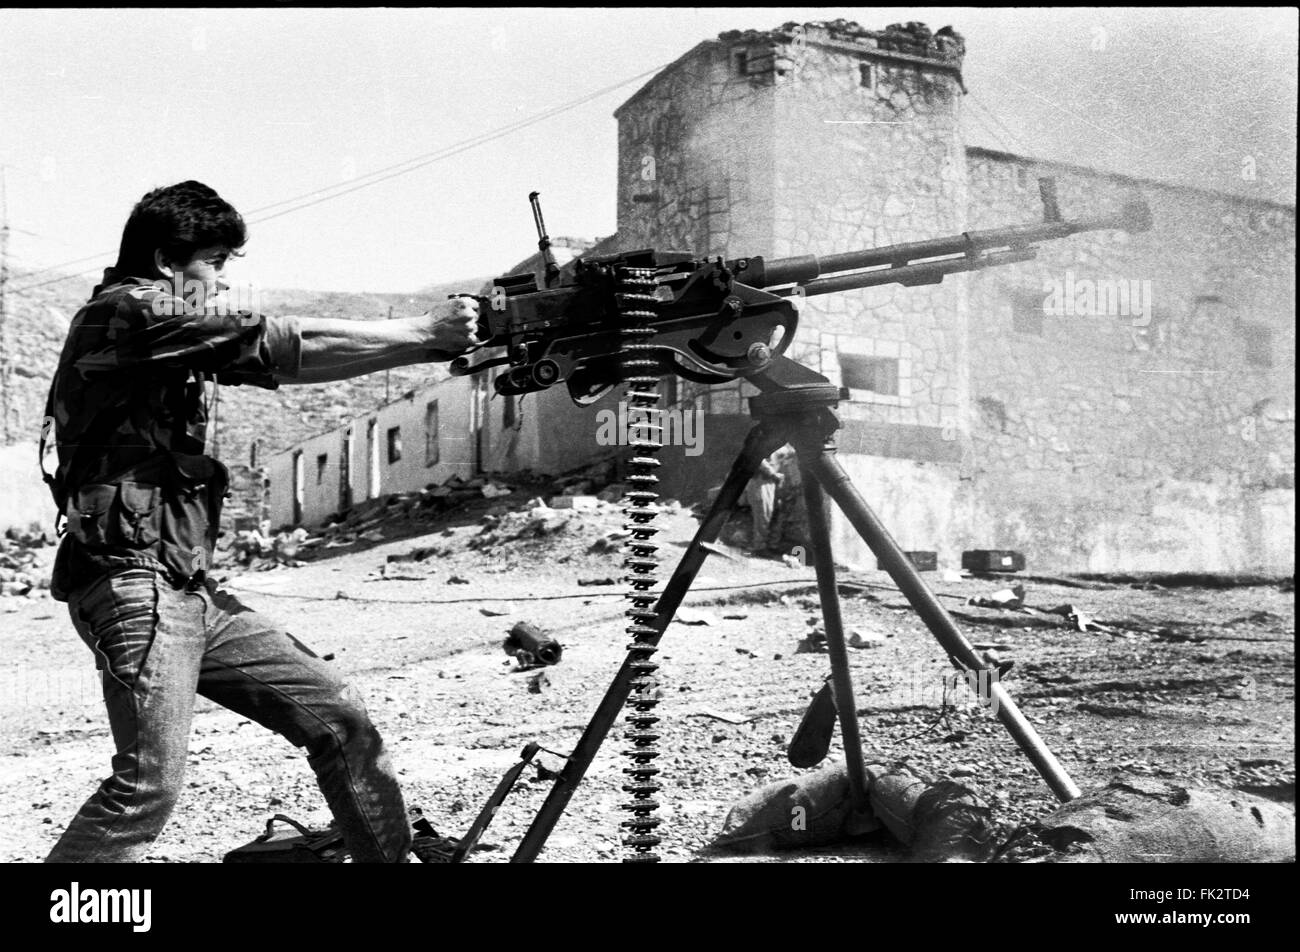 Near Zakho, northern Iraq, Kurdistan. March 1991. A fighter from the Kurdistan Front fires a heavy machine gun at an attacking Iraqi helicopter during the uprising by Kurds against forces of Saddam Hussein's government. Stock Photo